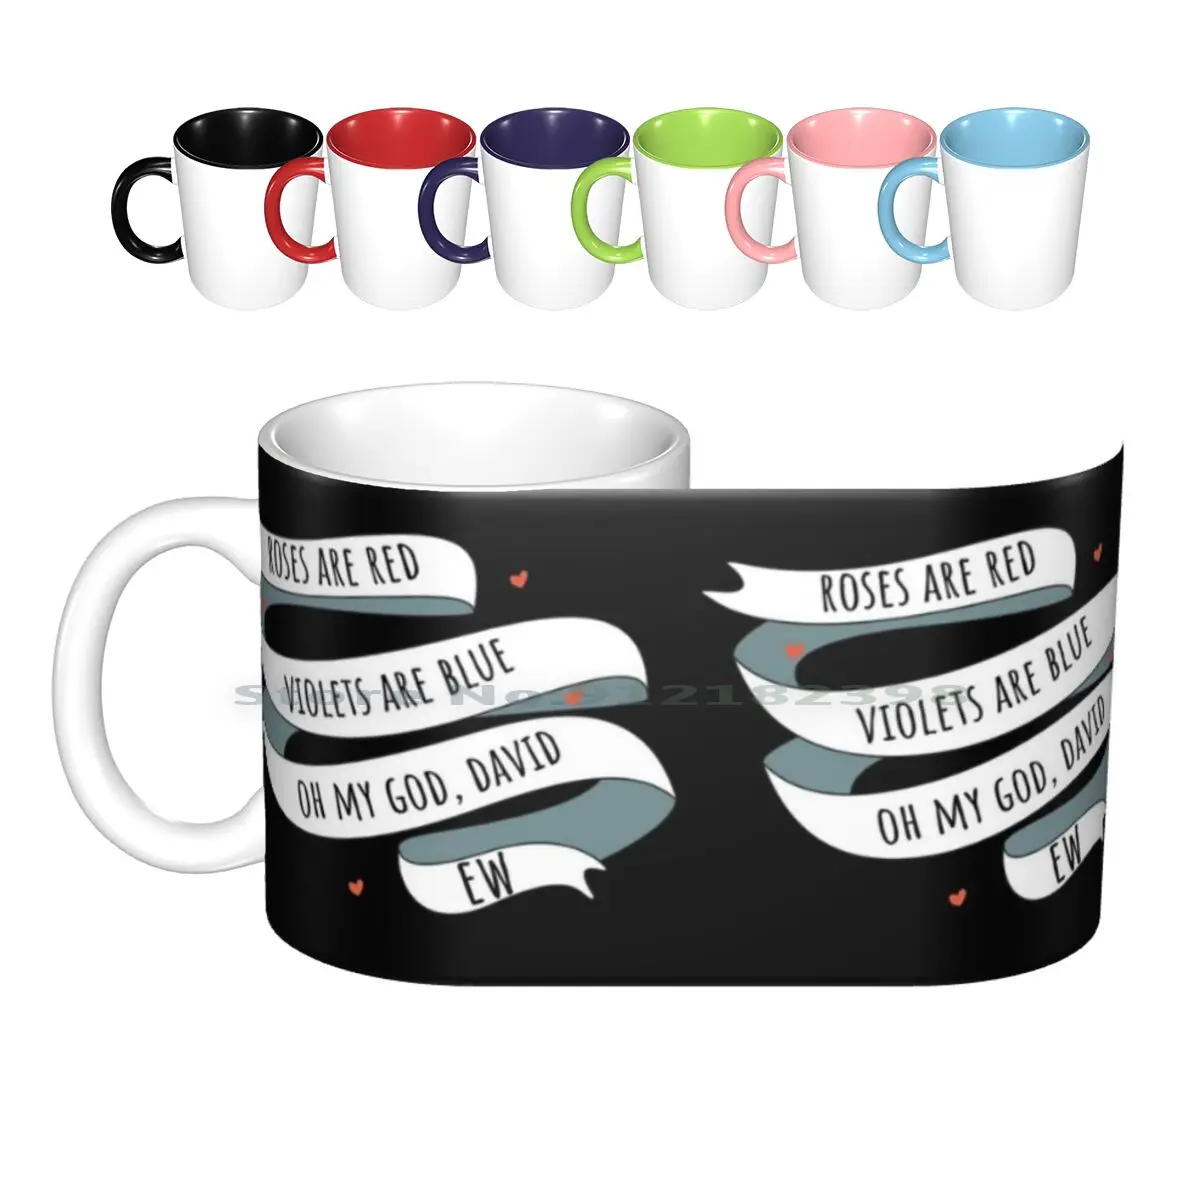 

Roses Are Red , Style. Roses Are Red , Violets Are Blue , Oh My God David , Ew! Ceramic Mugs Coffee Cups Milk Tea Mug Quote Tv